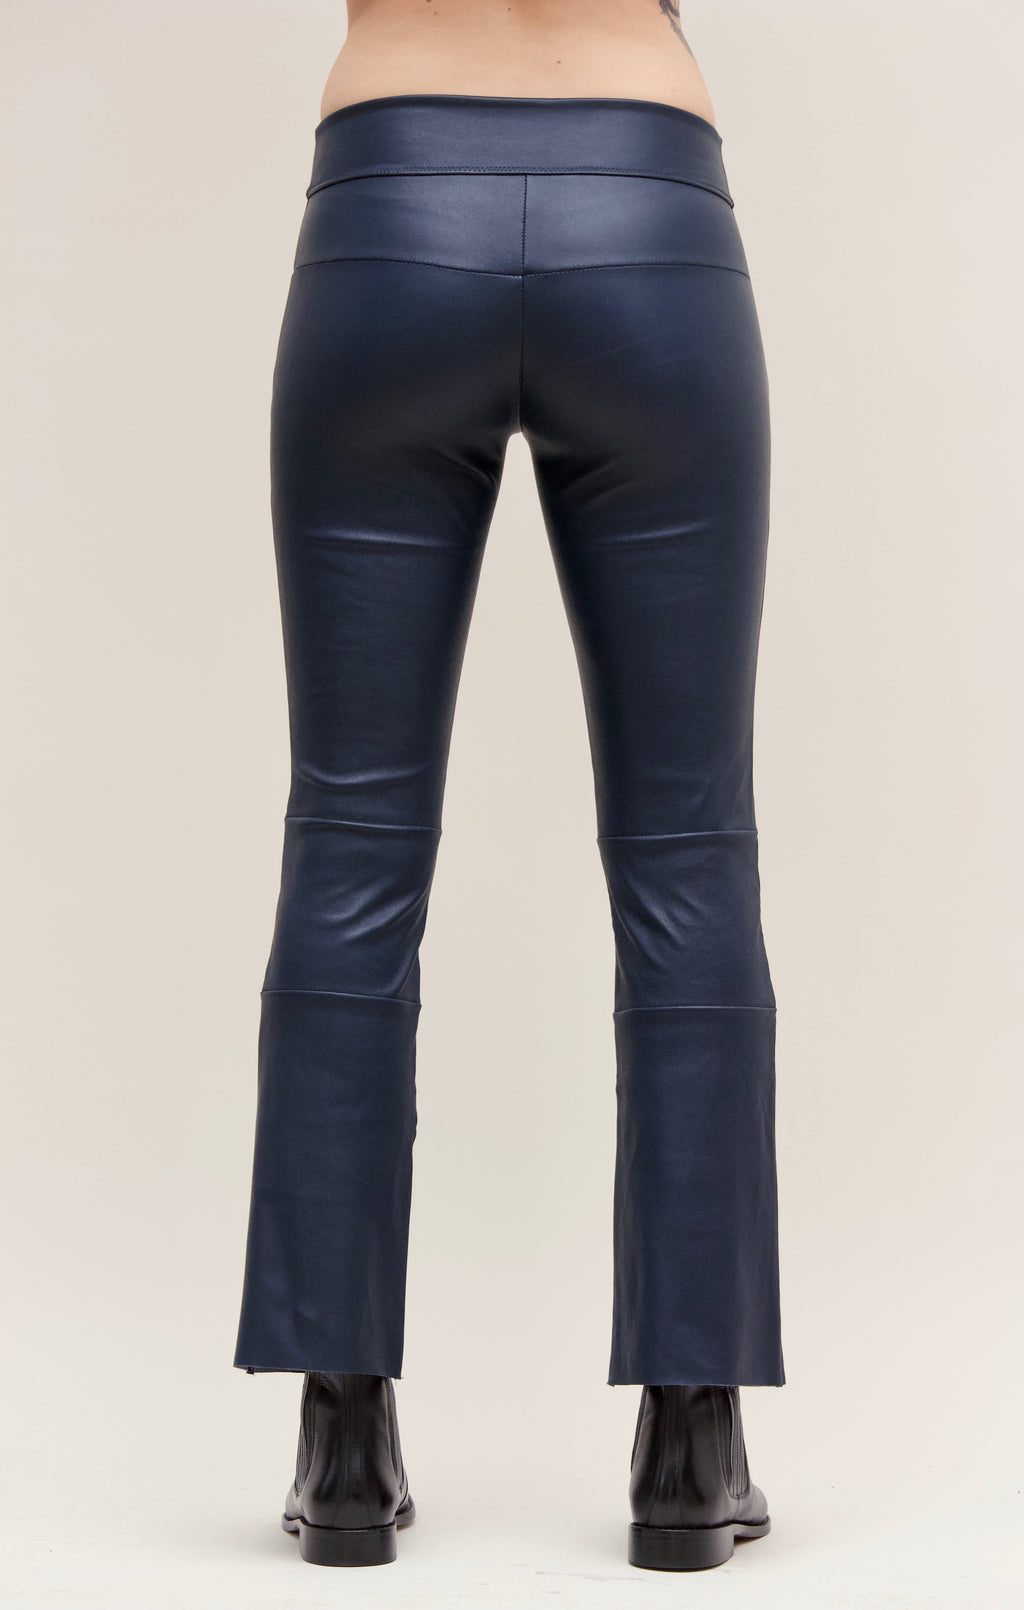 Sew and Tell: Liesl's Faux Leather Lisette B6295 Leggings